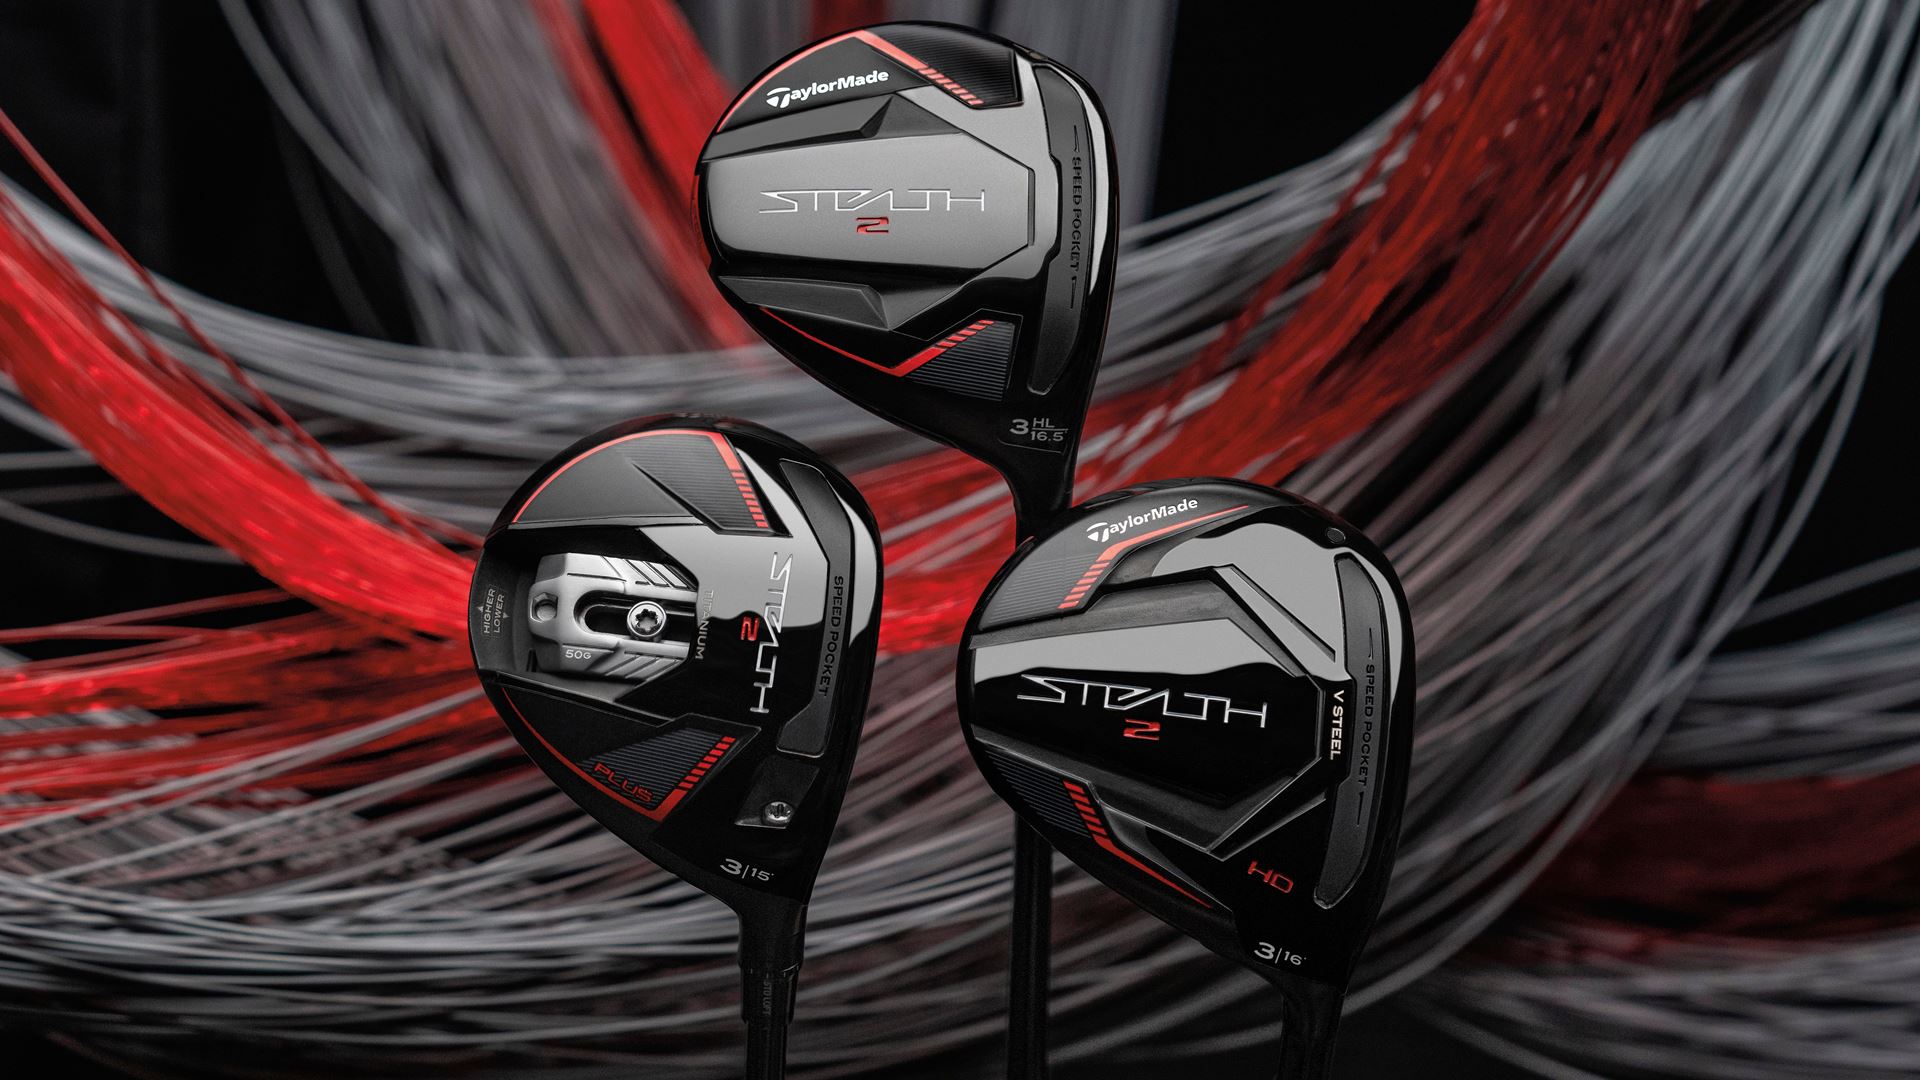 TaylorMade Golf Company Announces New Family of Stealth 2 Fairways and Hybrids | Featuring Versatile Designs and Breakthrough Technologies to Fit Golfers of All Abilities